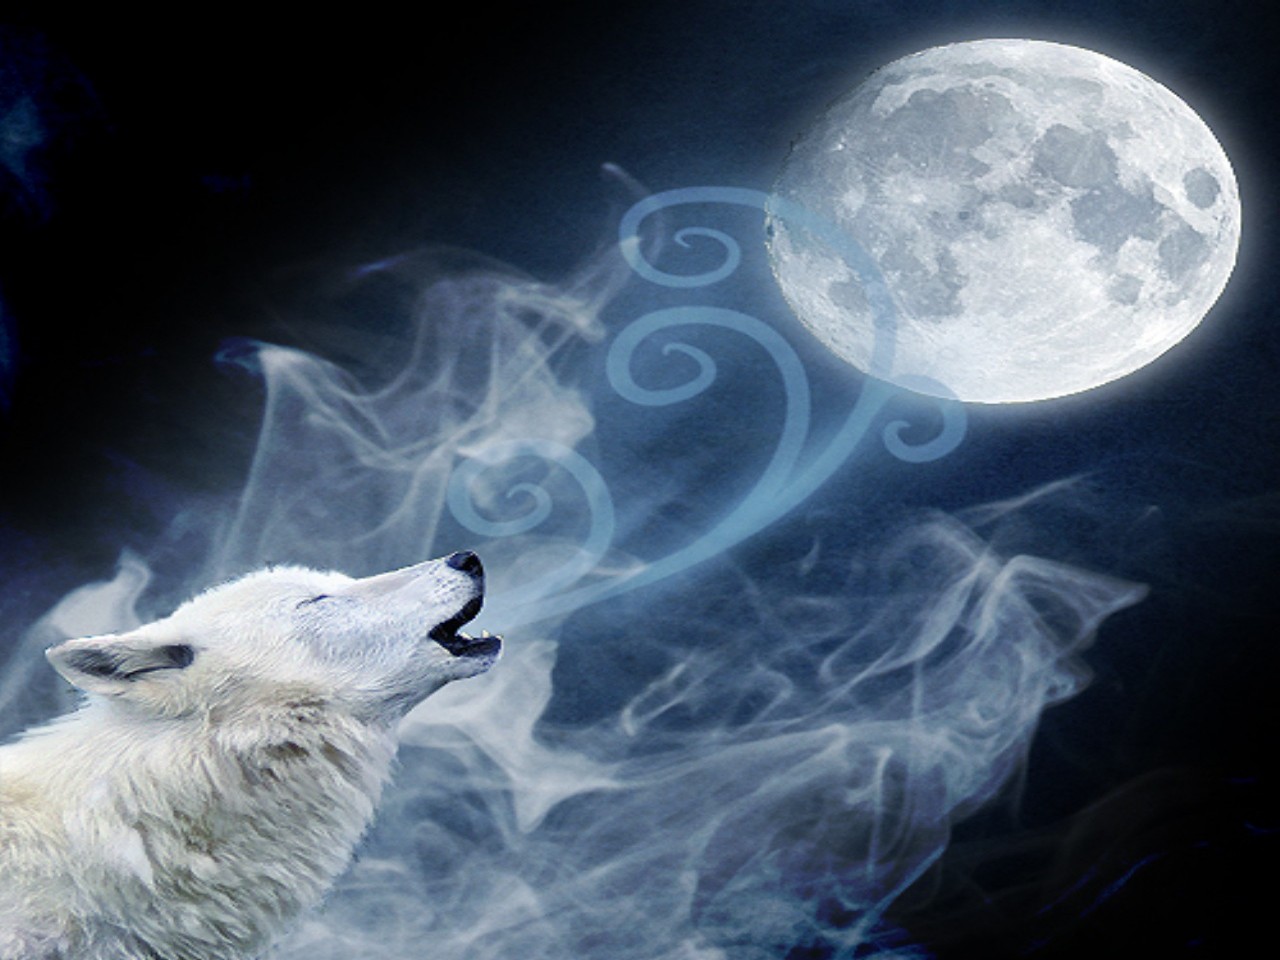 Howling Wolf Moon